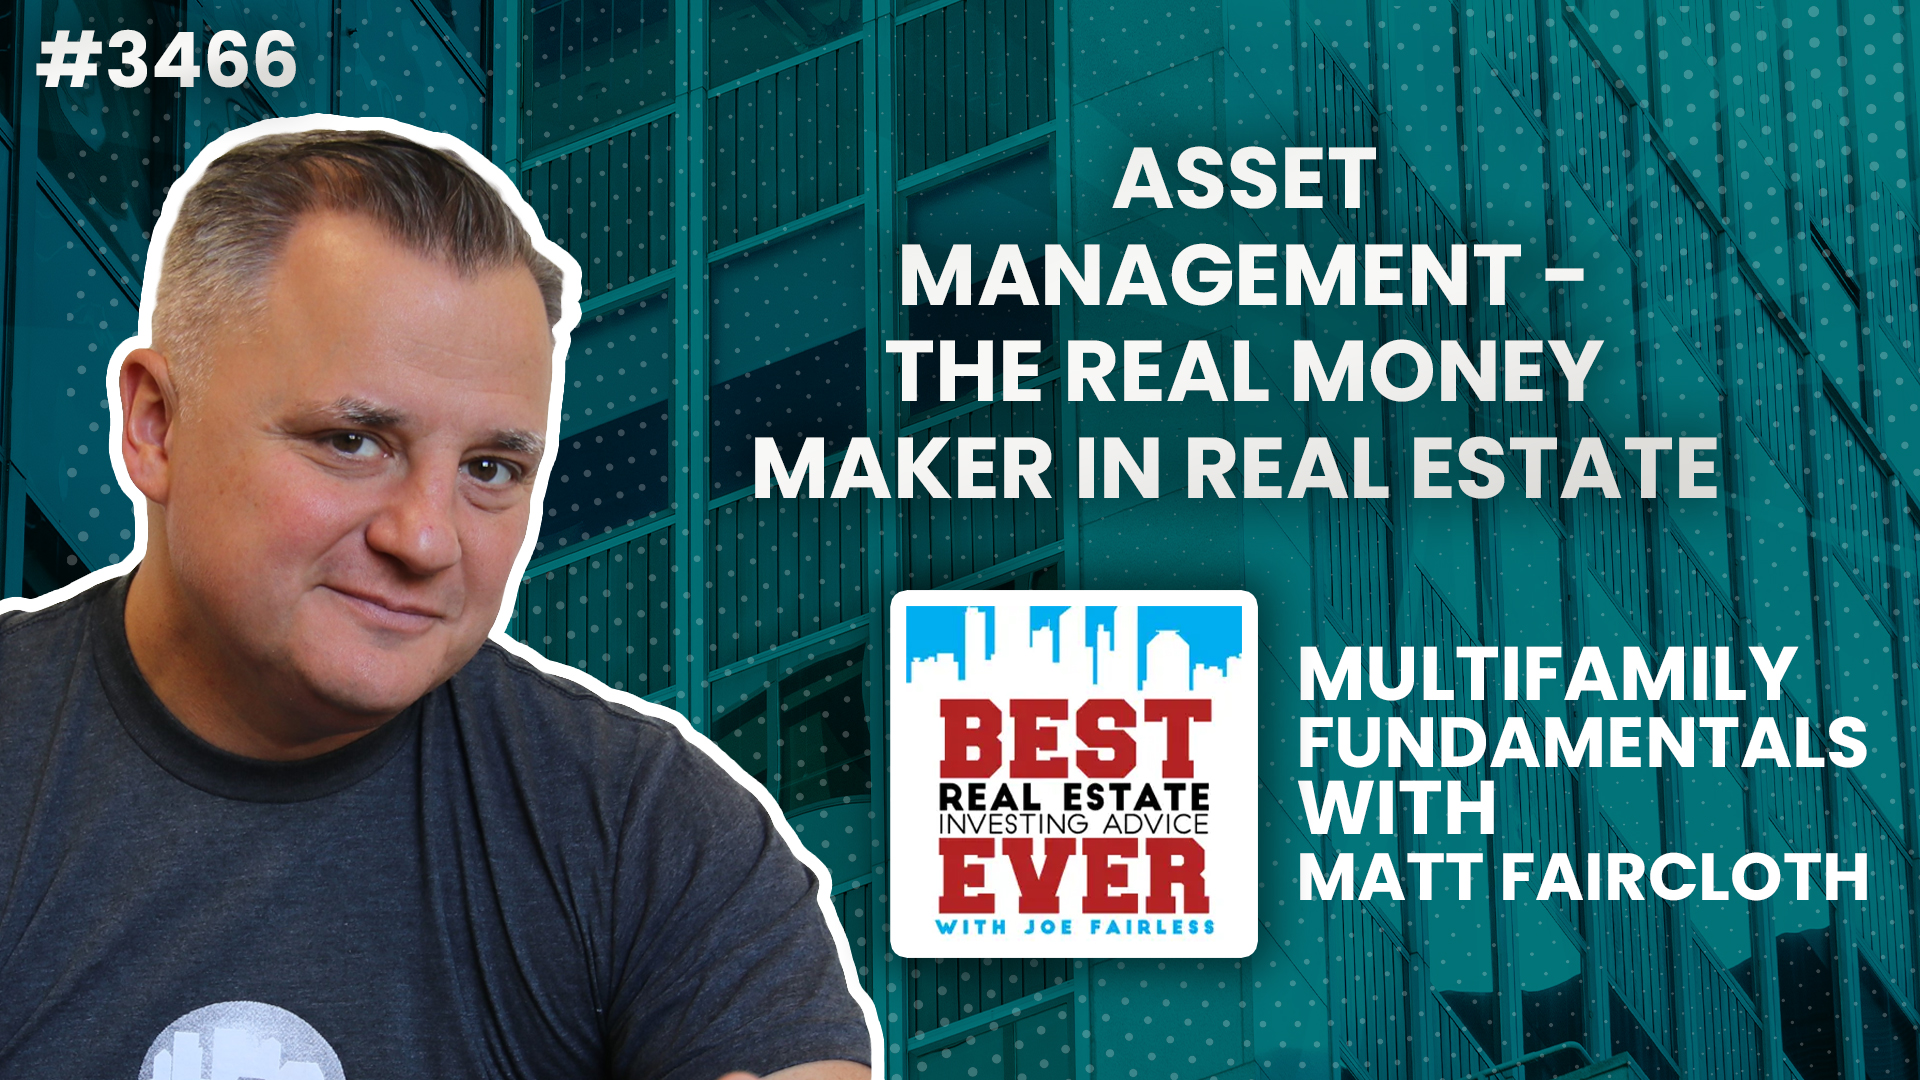 JF3466: Asset Management - the Real Money Maker in Real Estate | Multifamily Fundamentals